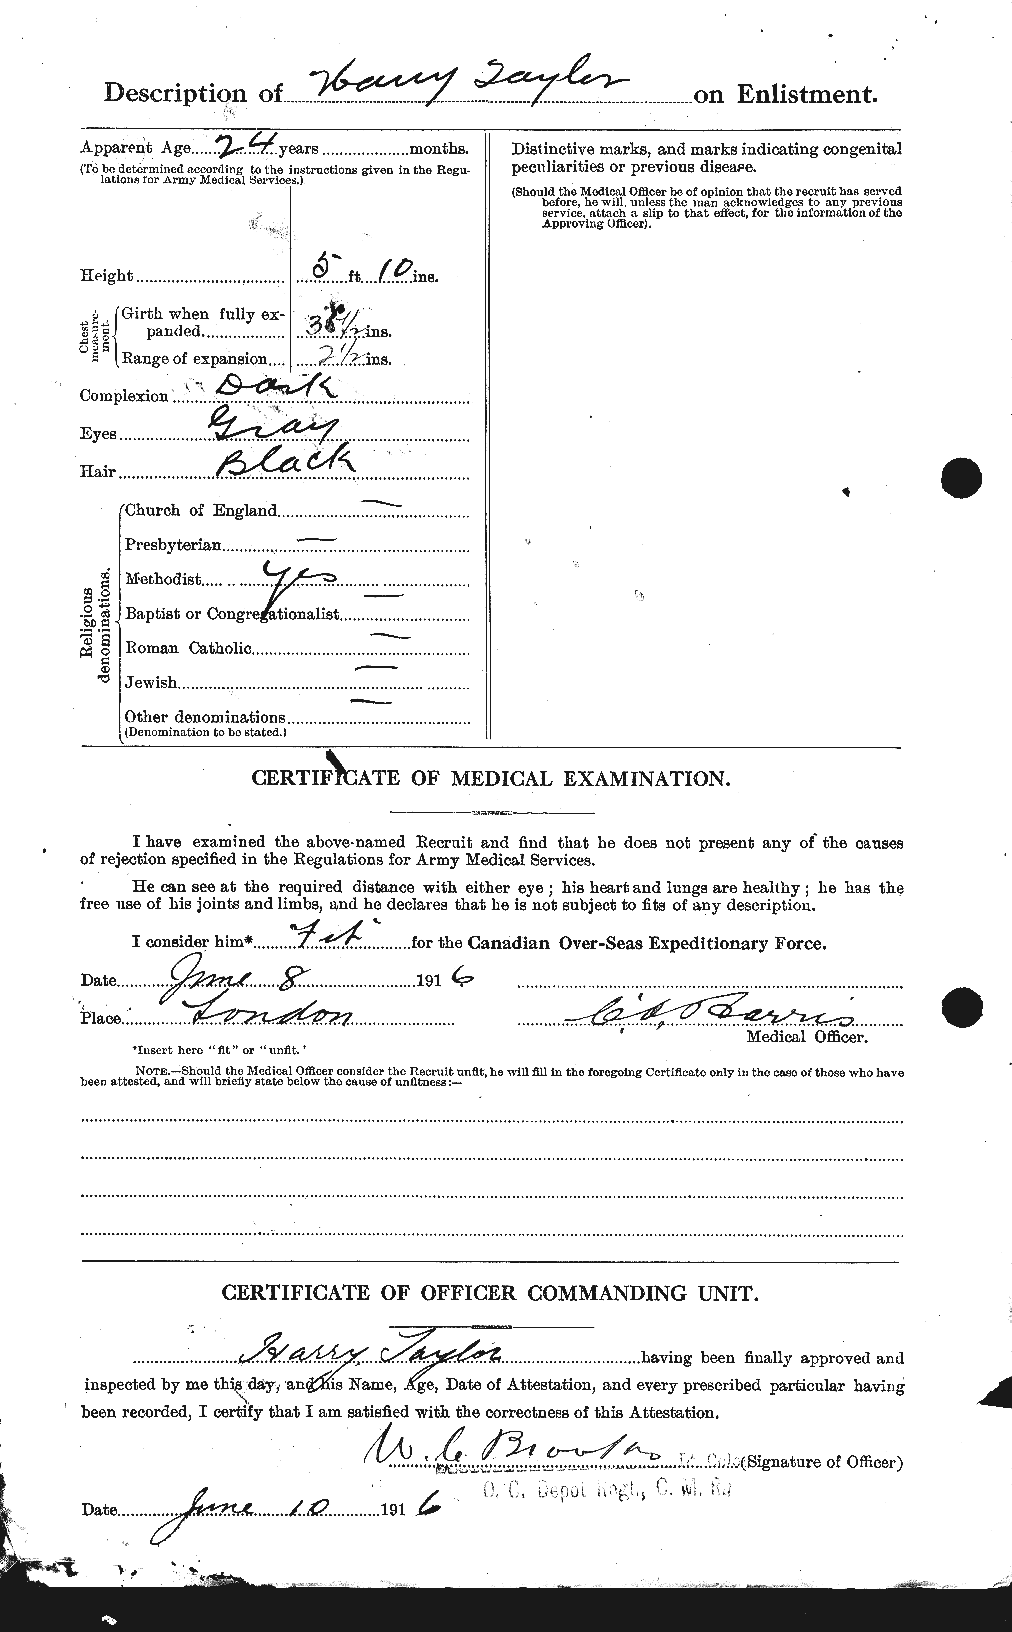 Personnel Records of the First World War - CEF 626470b